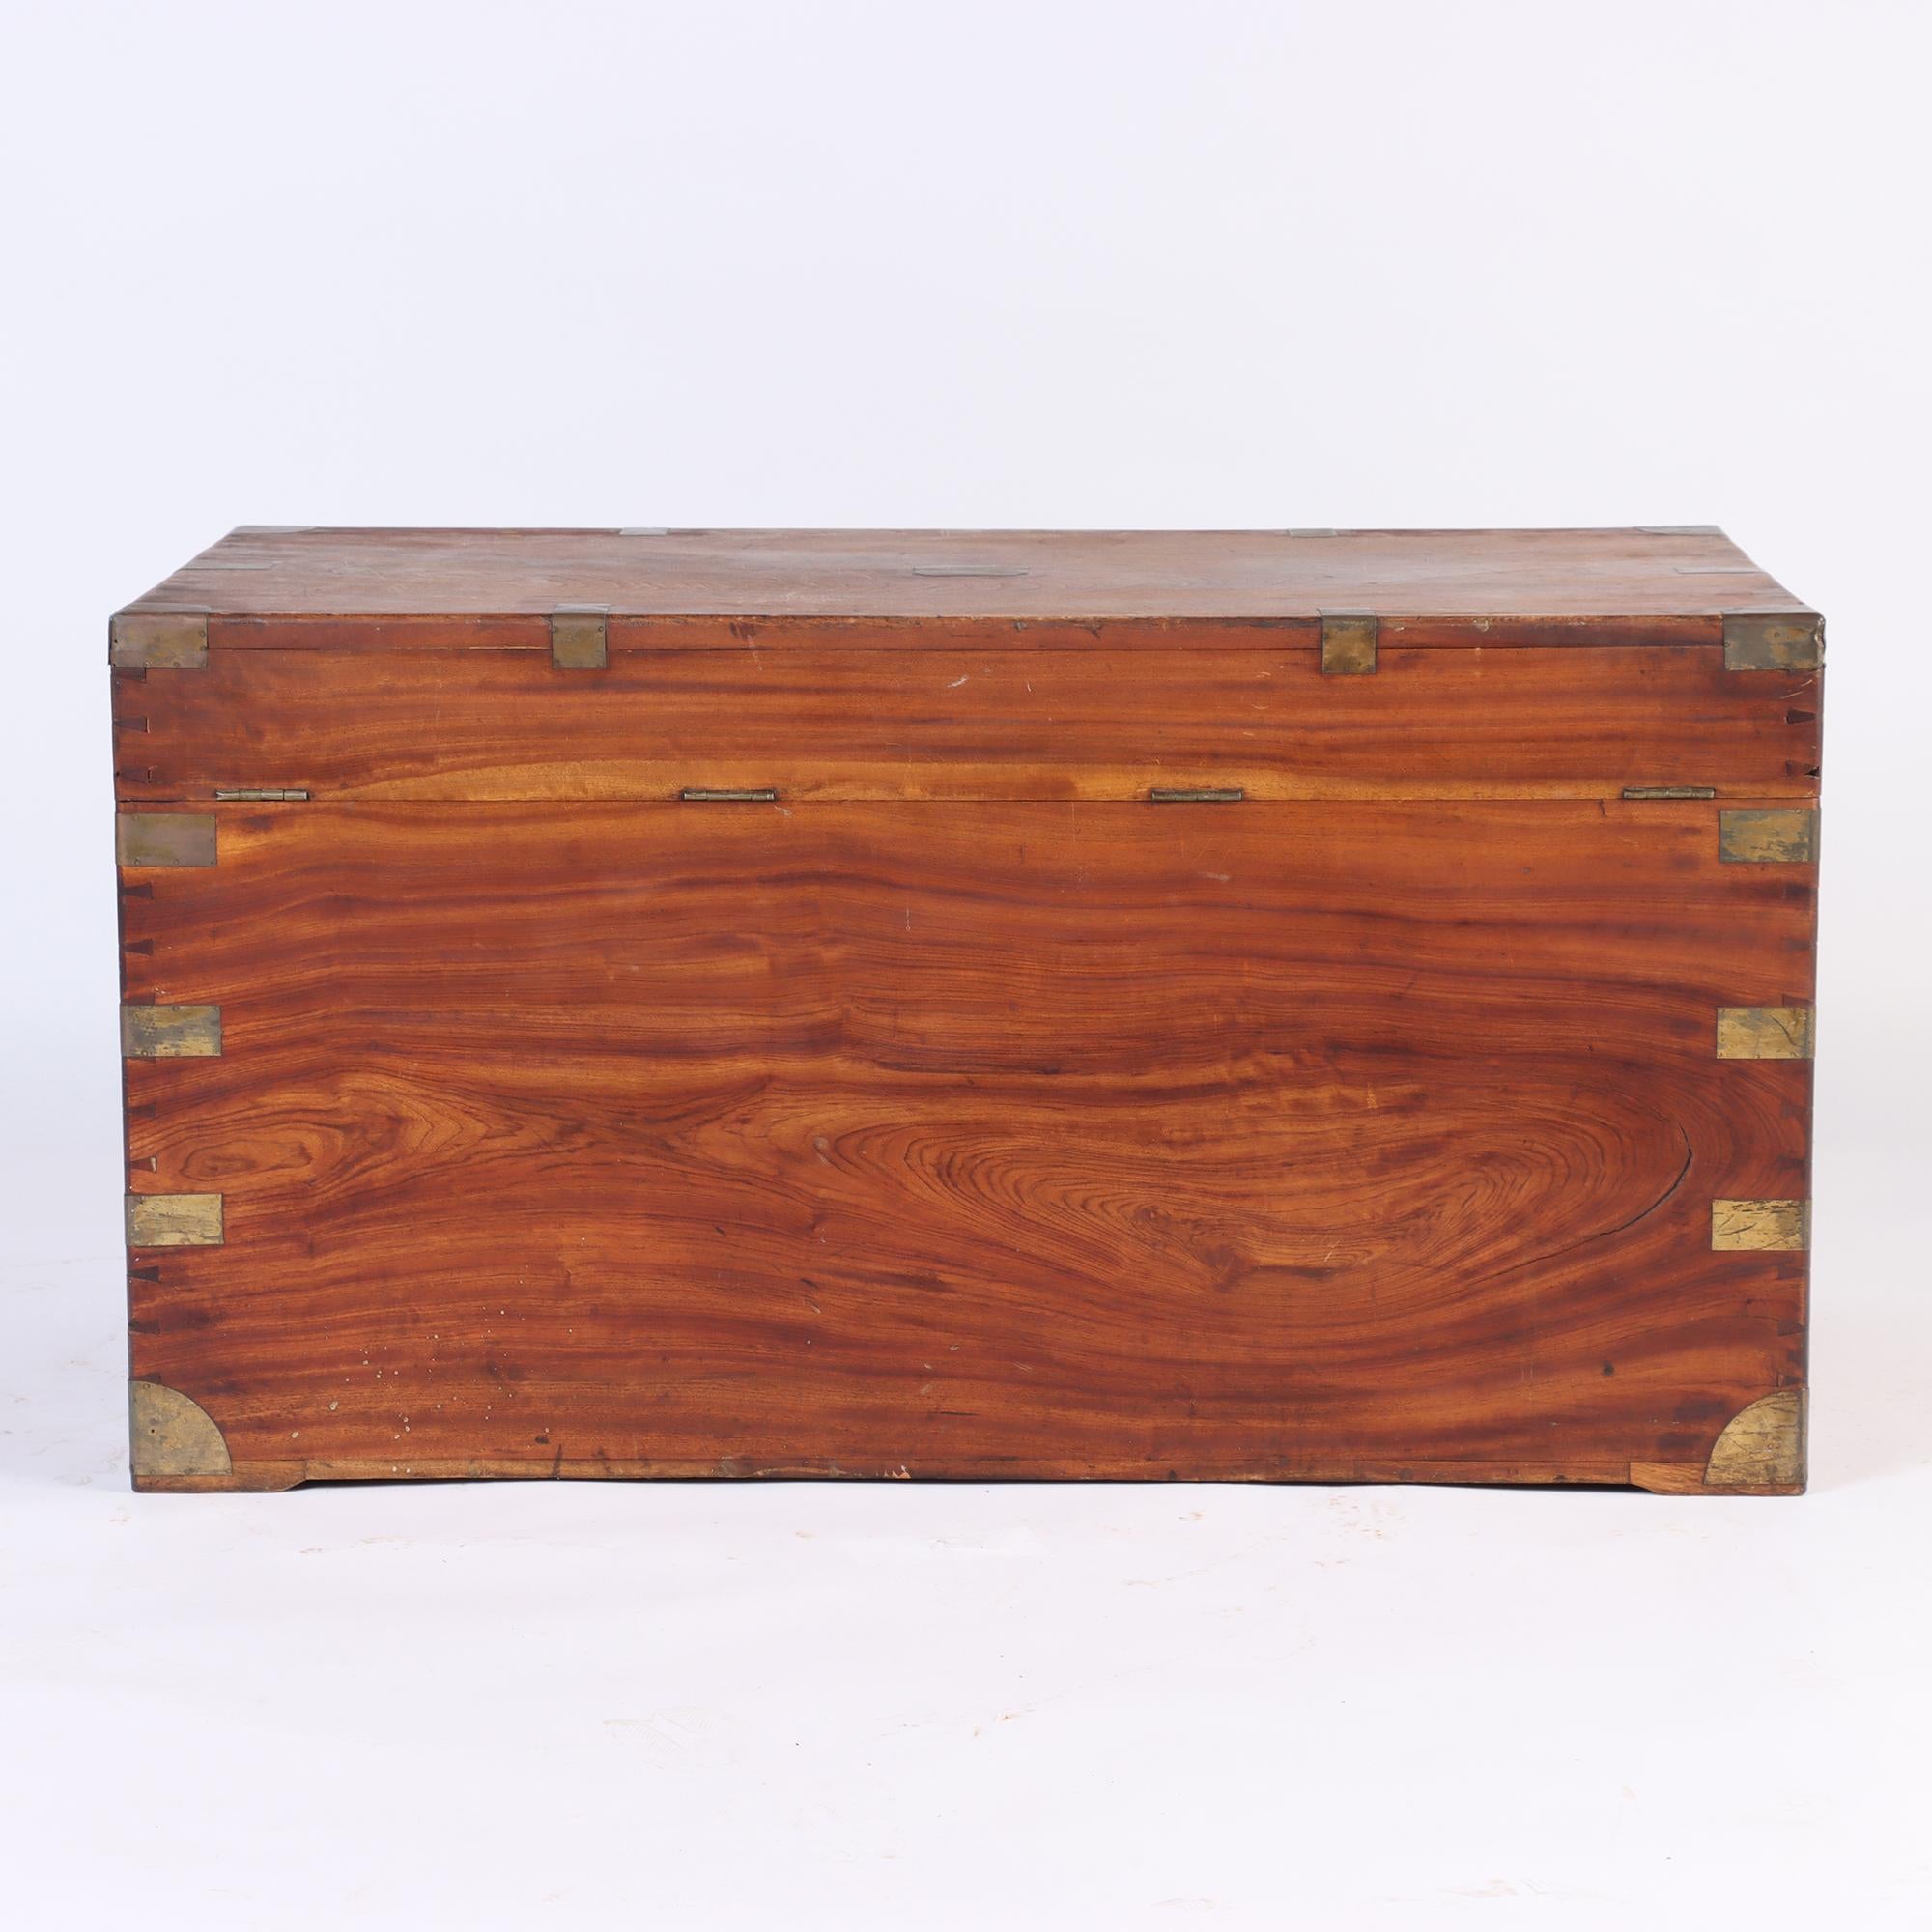 Large Marine Chest / Campaign Chest in Camphor Wood from the 19th Century For Sale 3